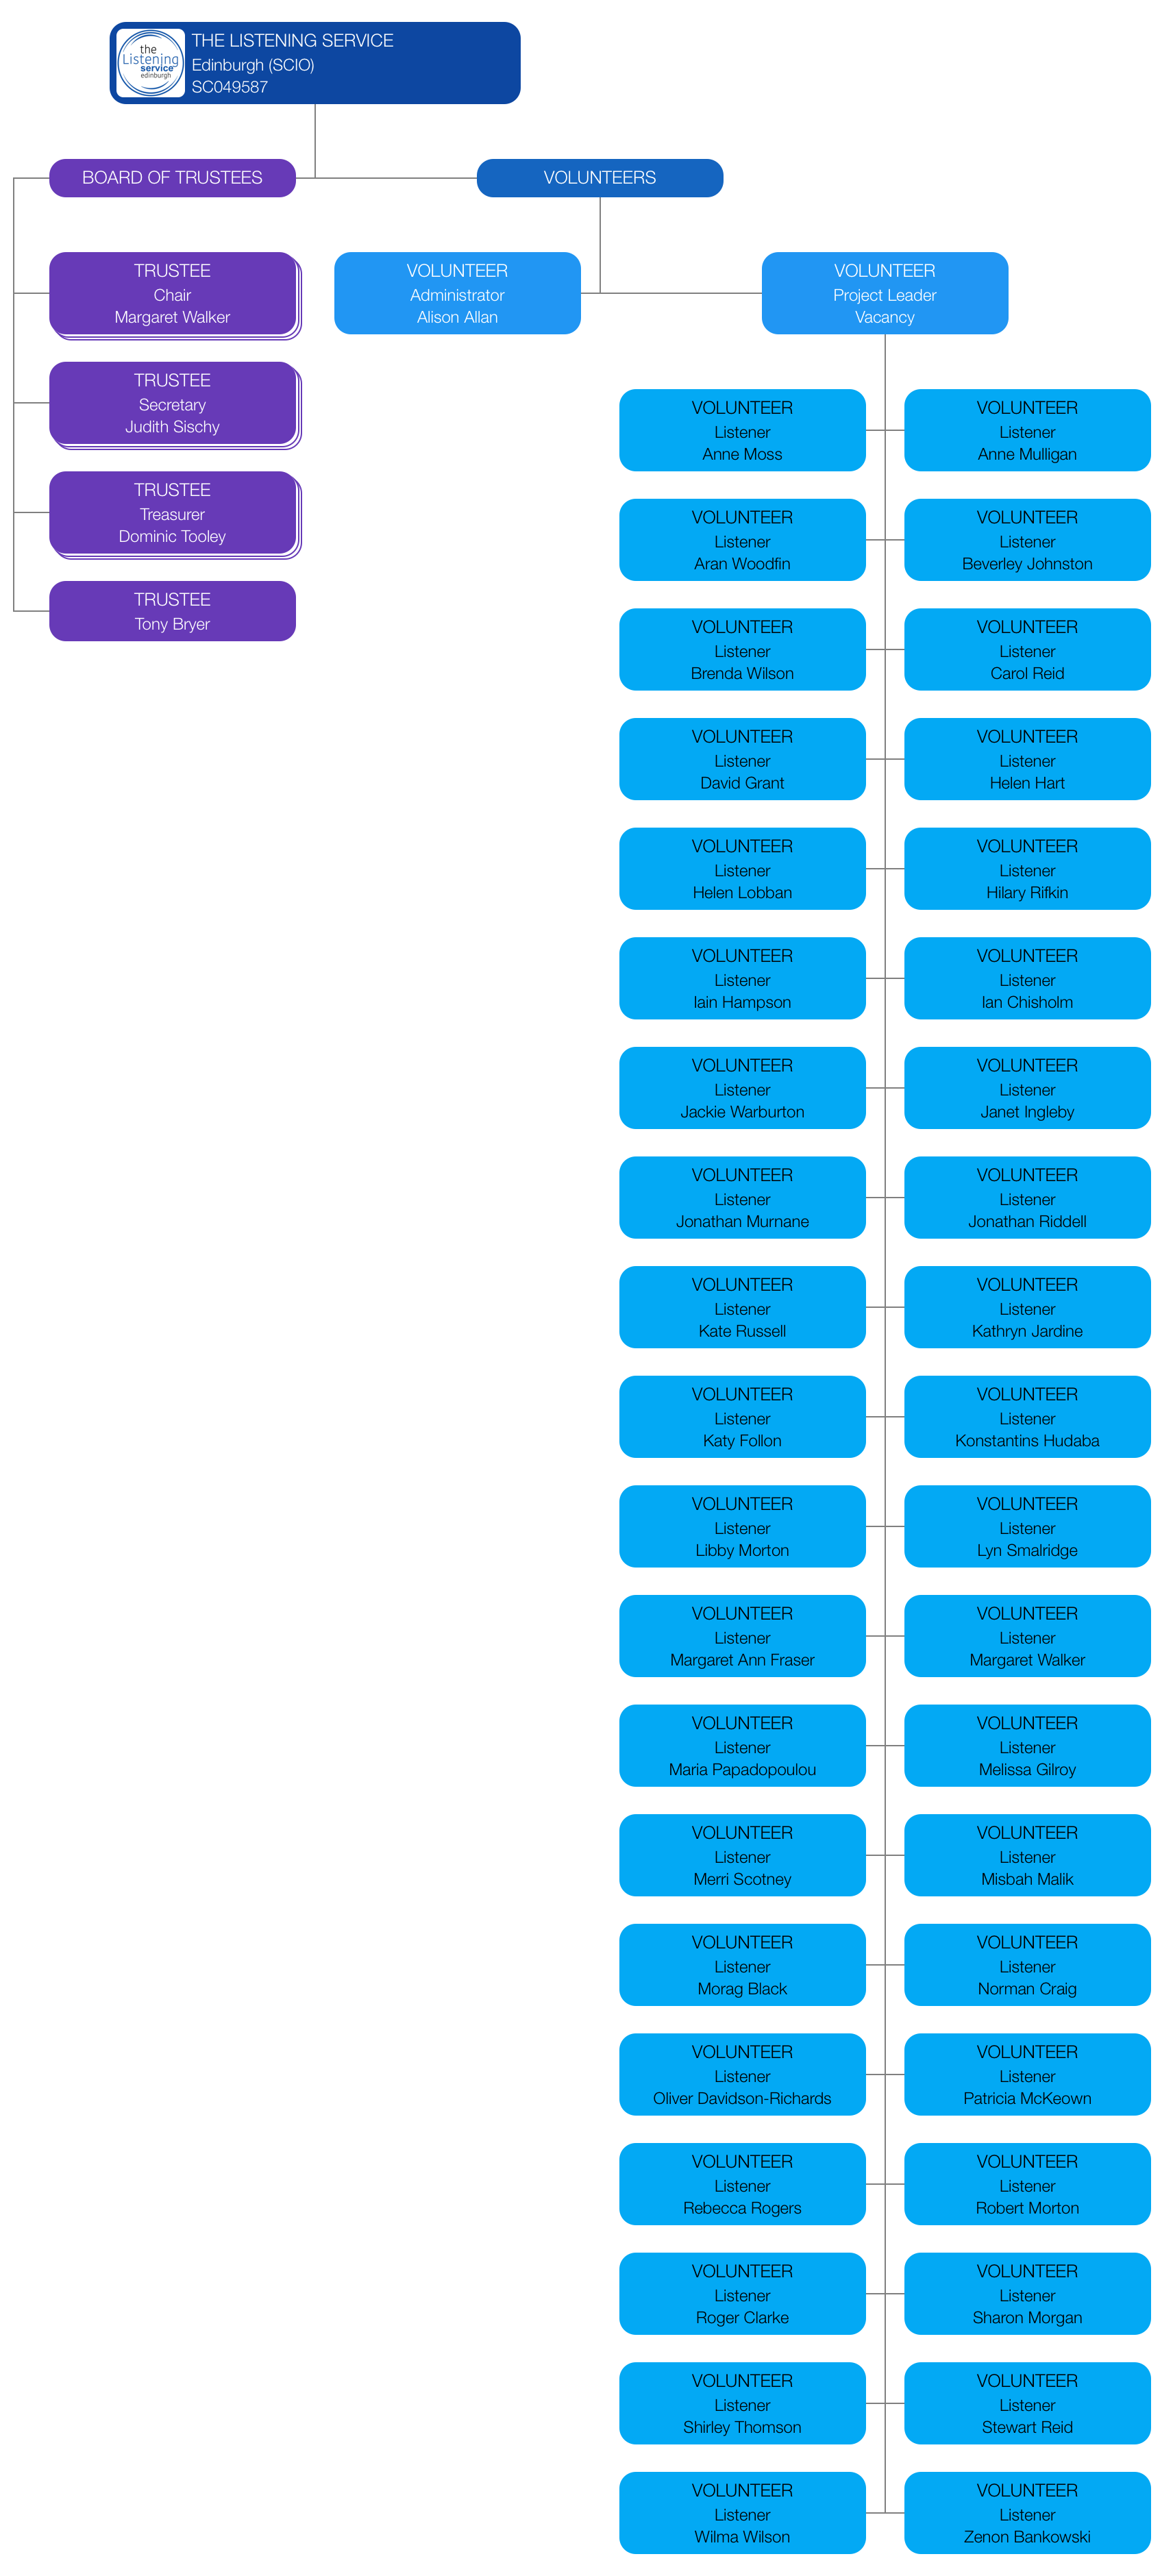 An organisation chart of the people who provide the listening service Edinburgh.